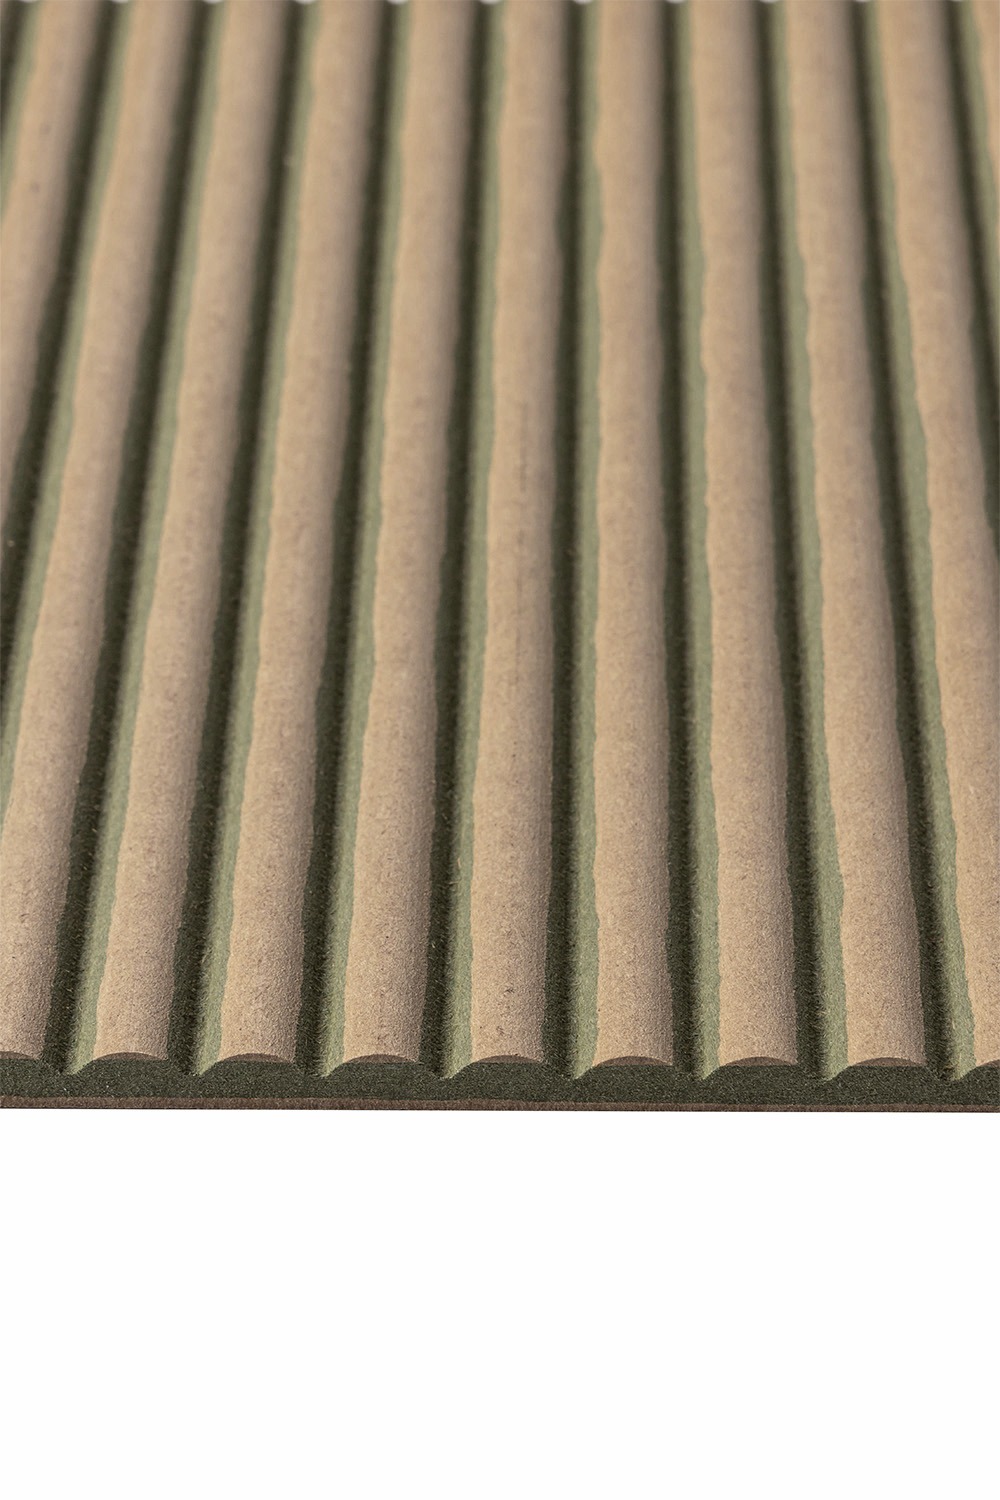 photo that show what features a reeded wooden panel has